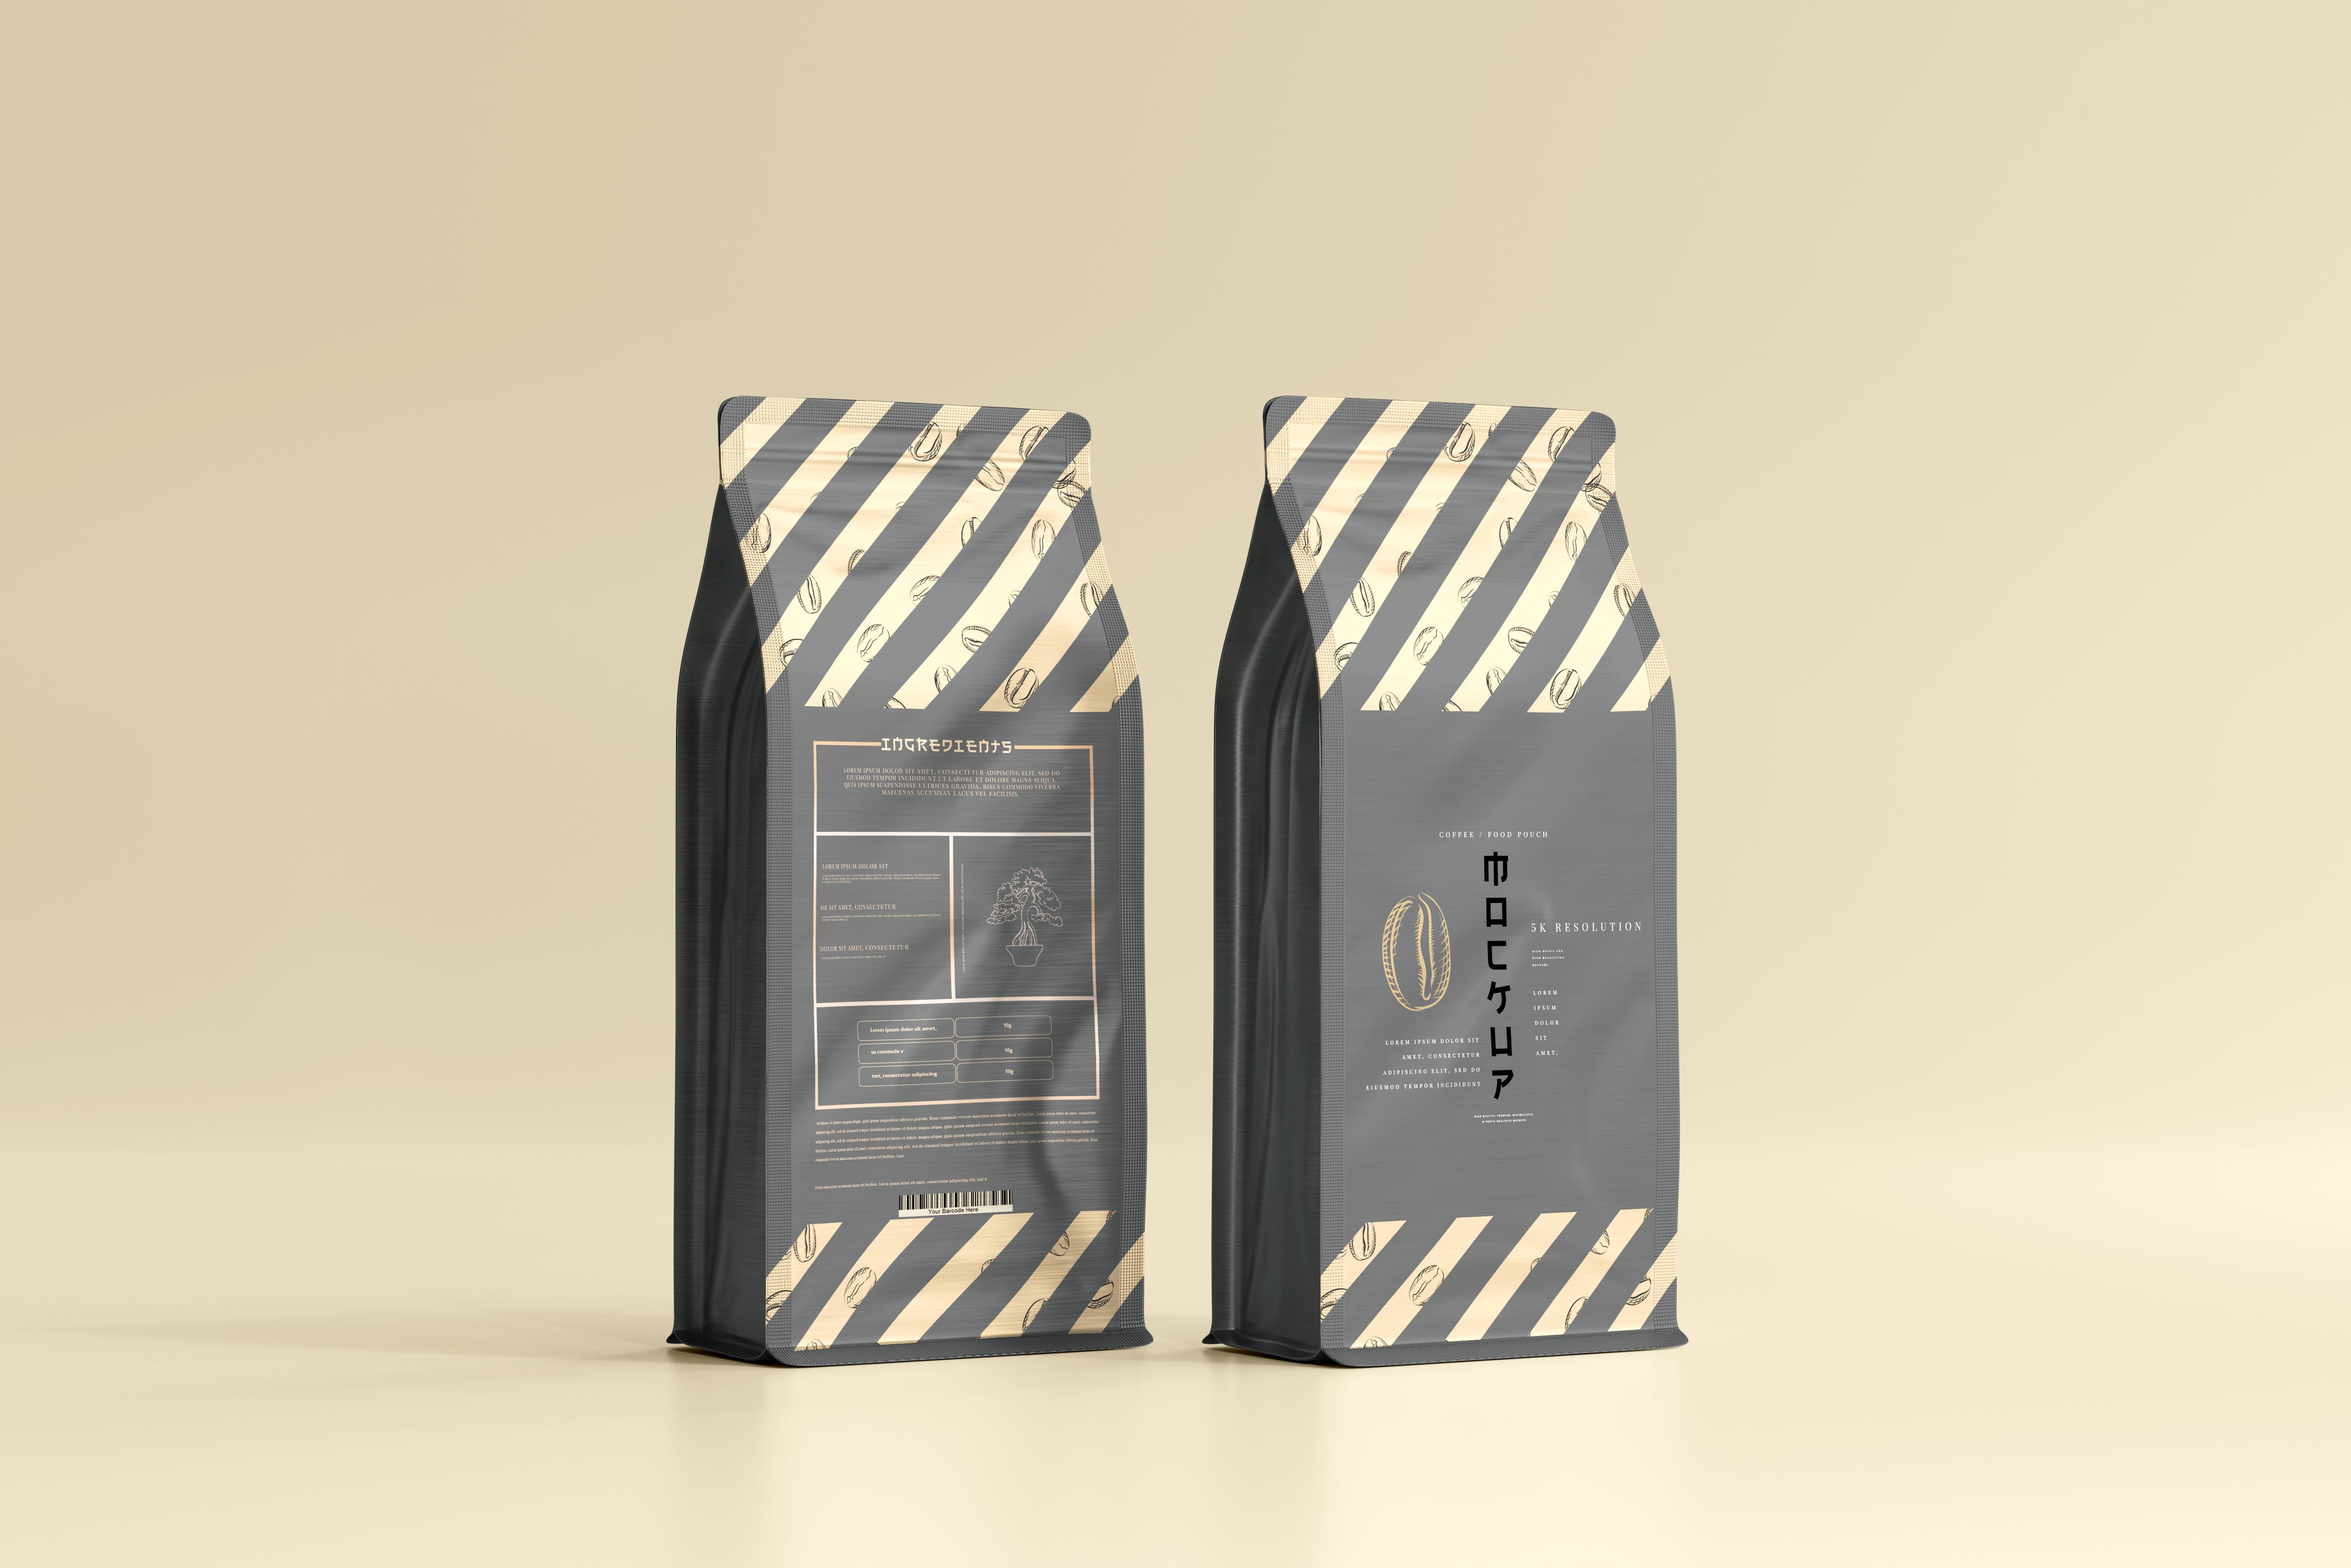 large size coffee bag packaging mockup – PMVCH